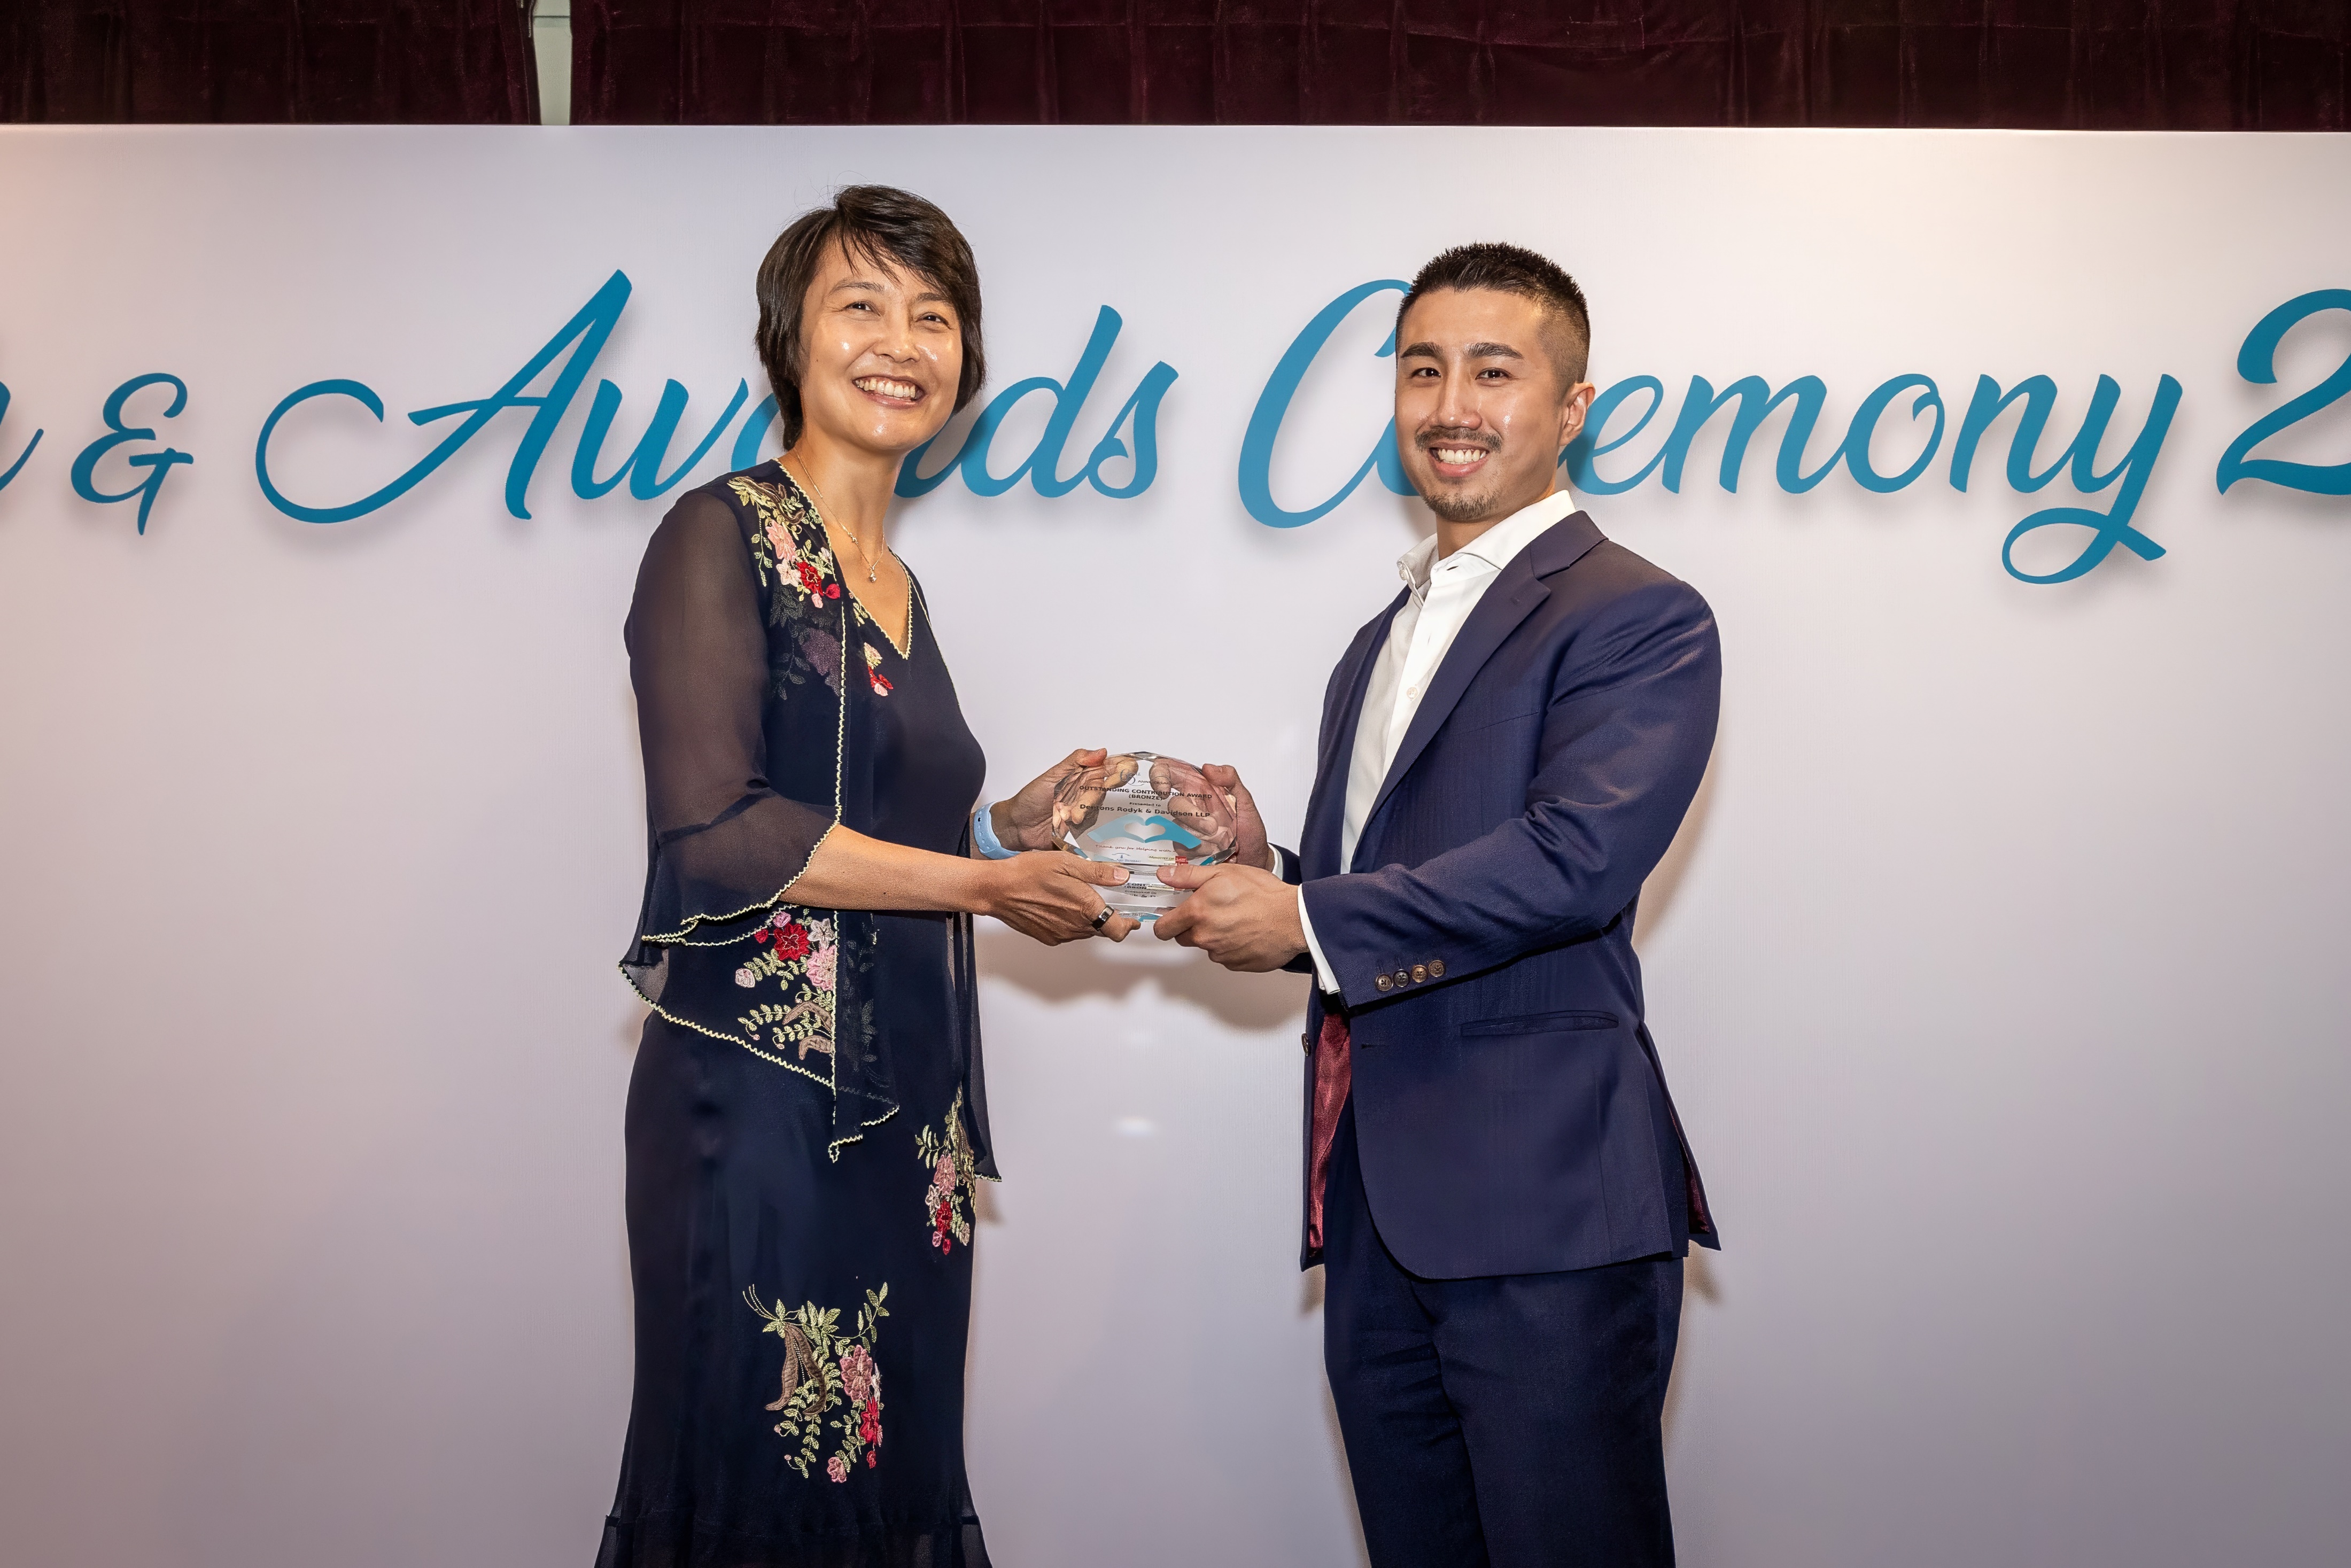 Senior Associate Alwyn Tan received the award on behalf of the firm from Ms. Lim Hui Min, the Director of Legal Aid